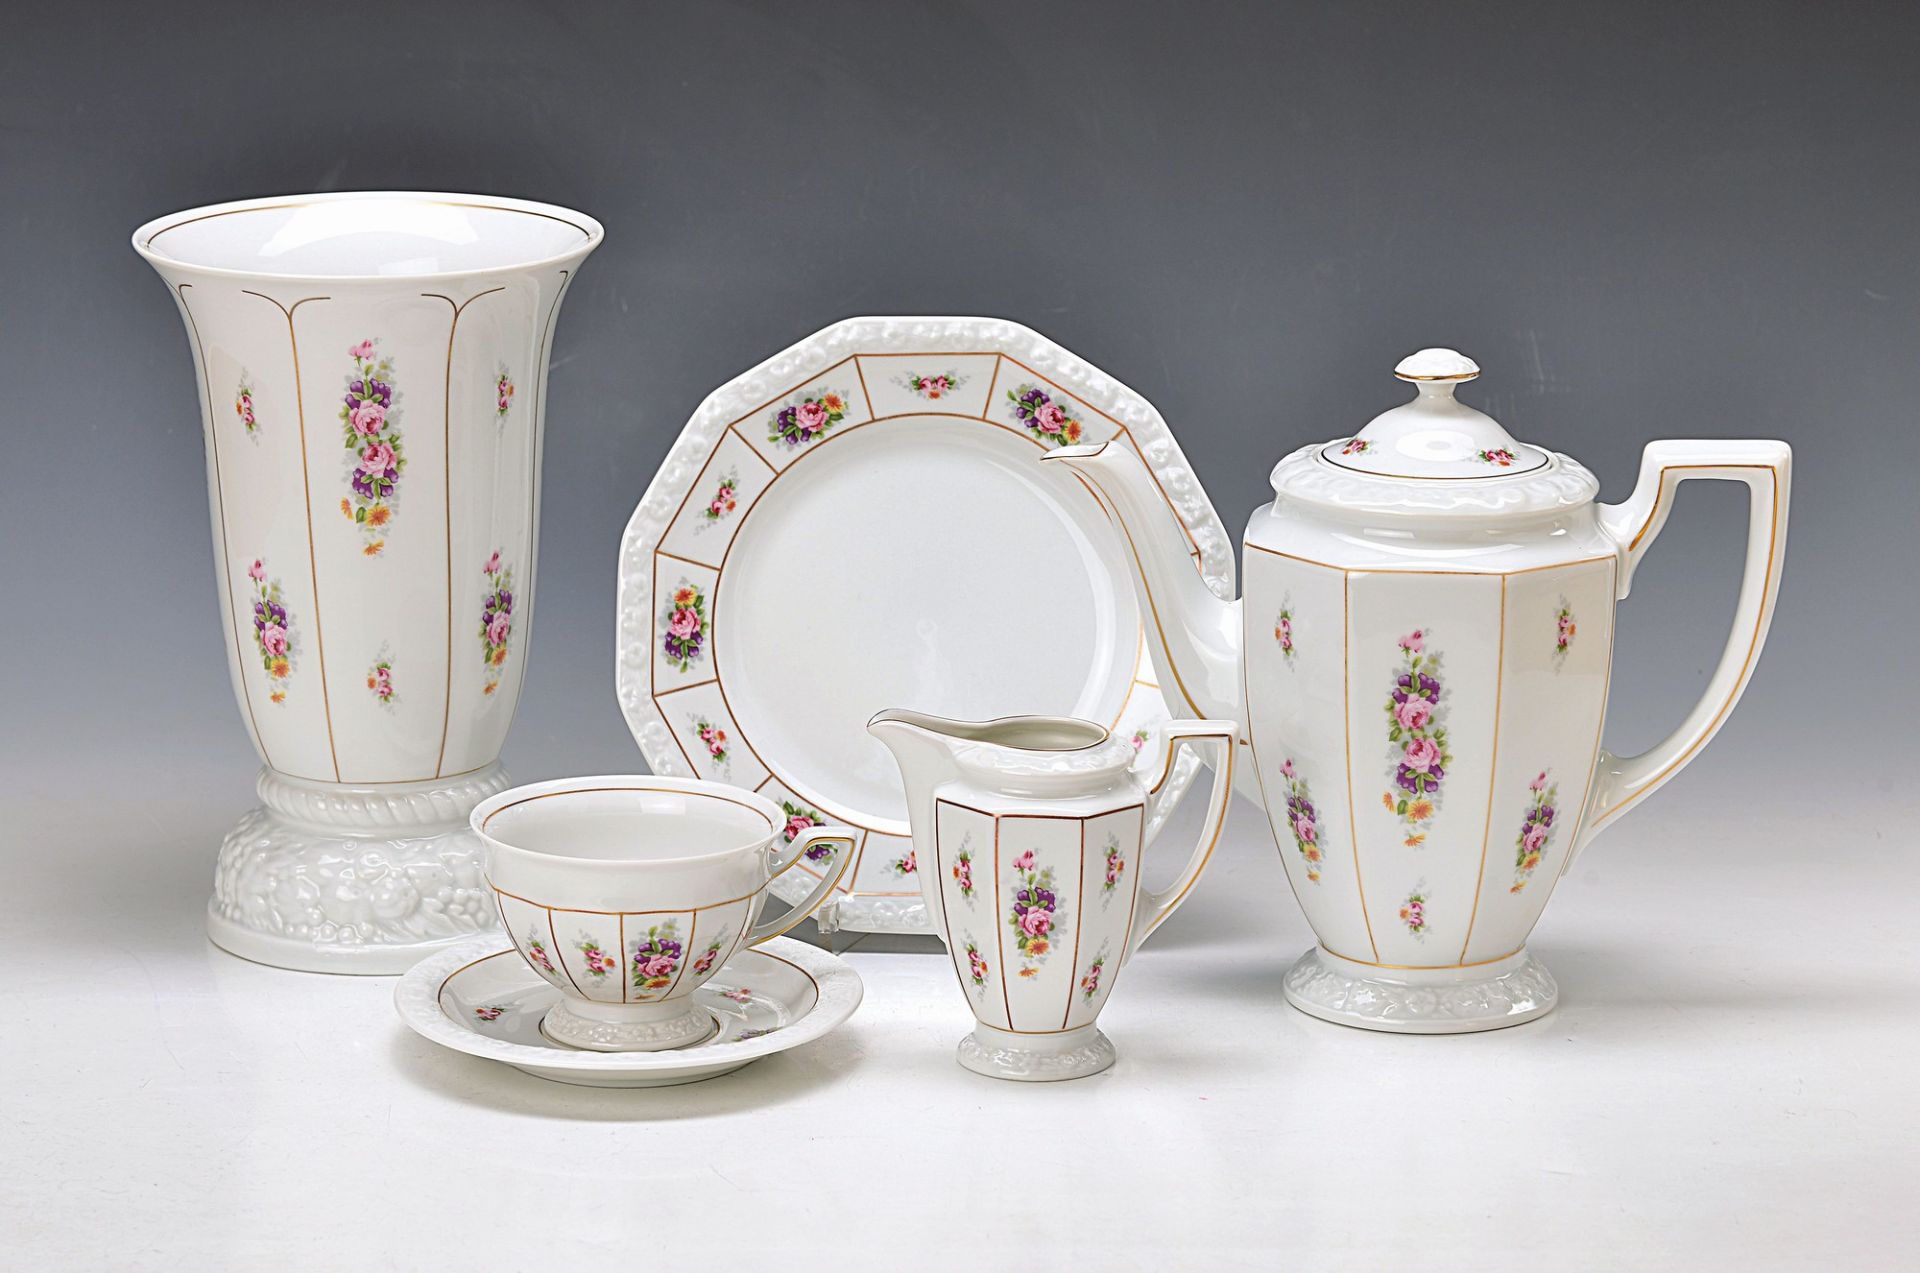 coffee set for 11 people, Rosenthal, classic rose, model Maria with colorful flower bouquets and